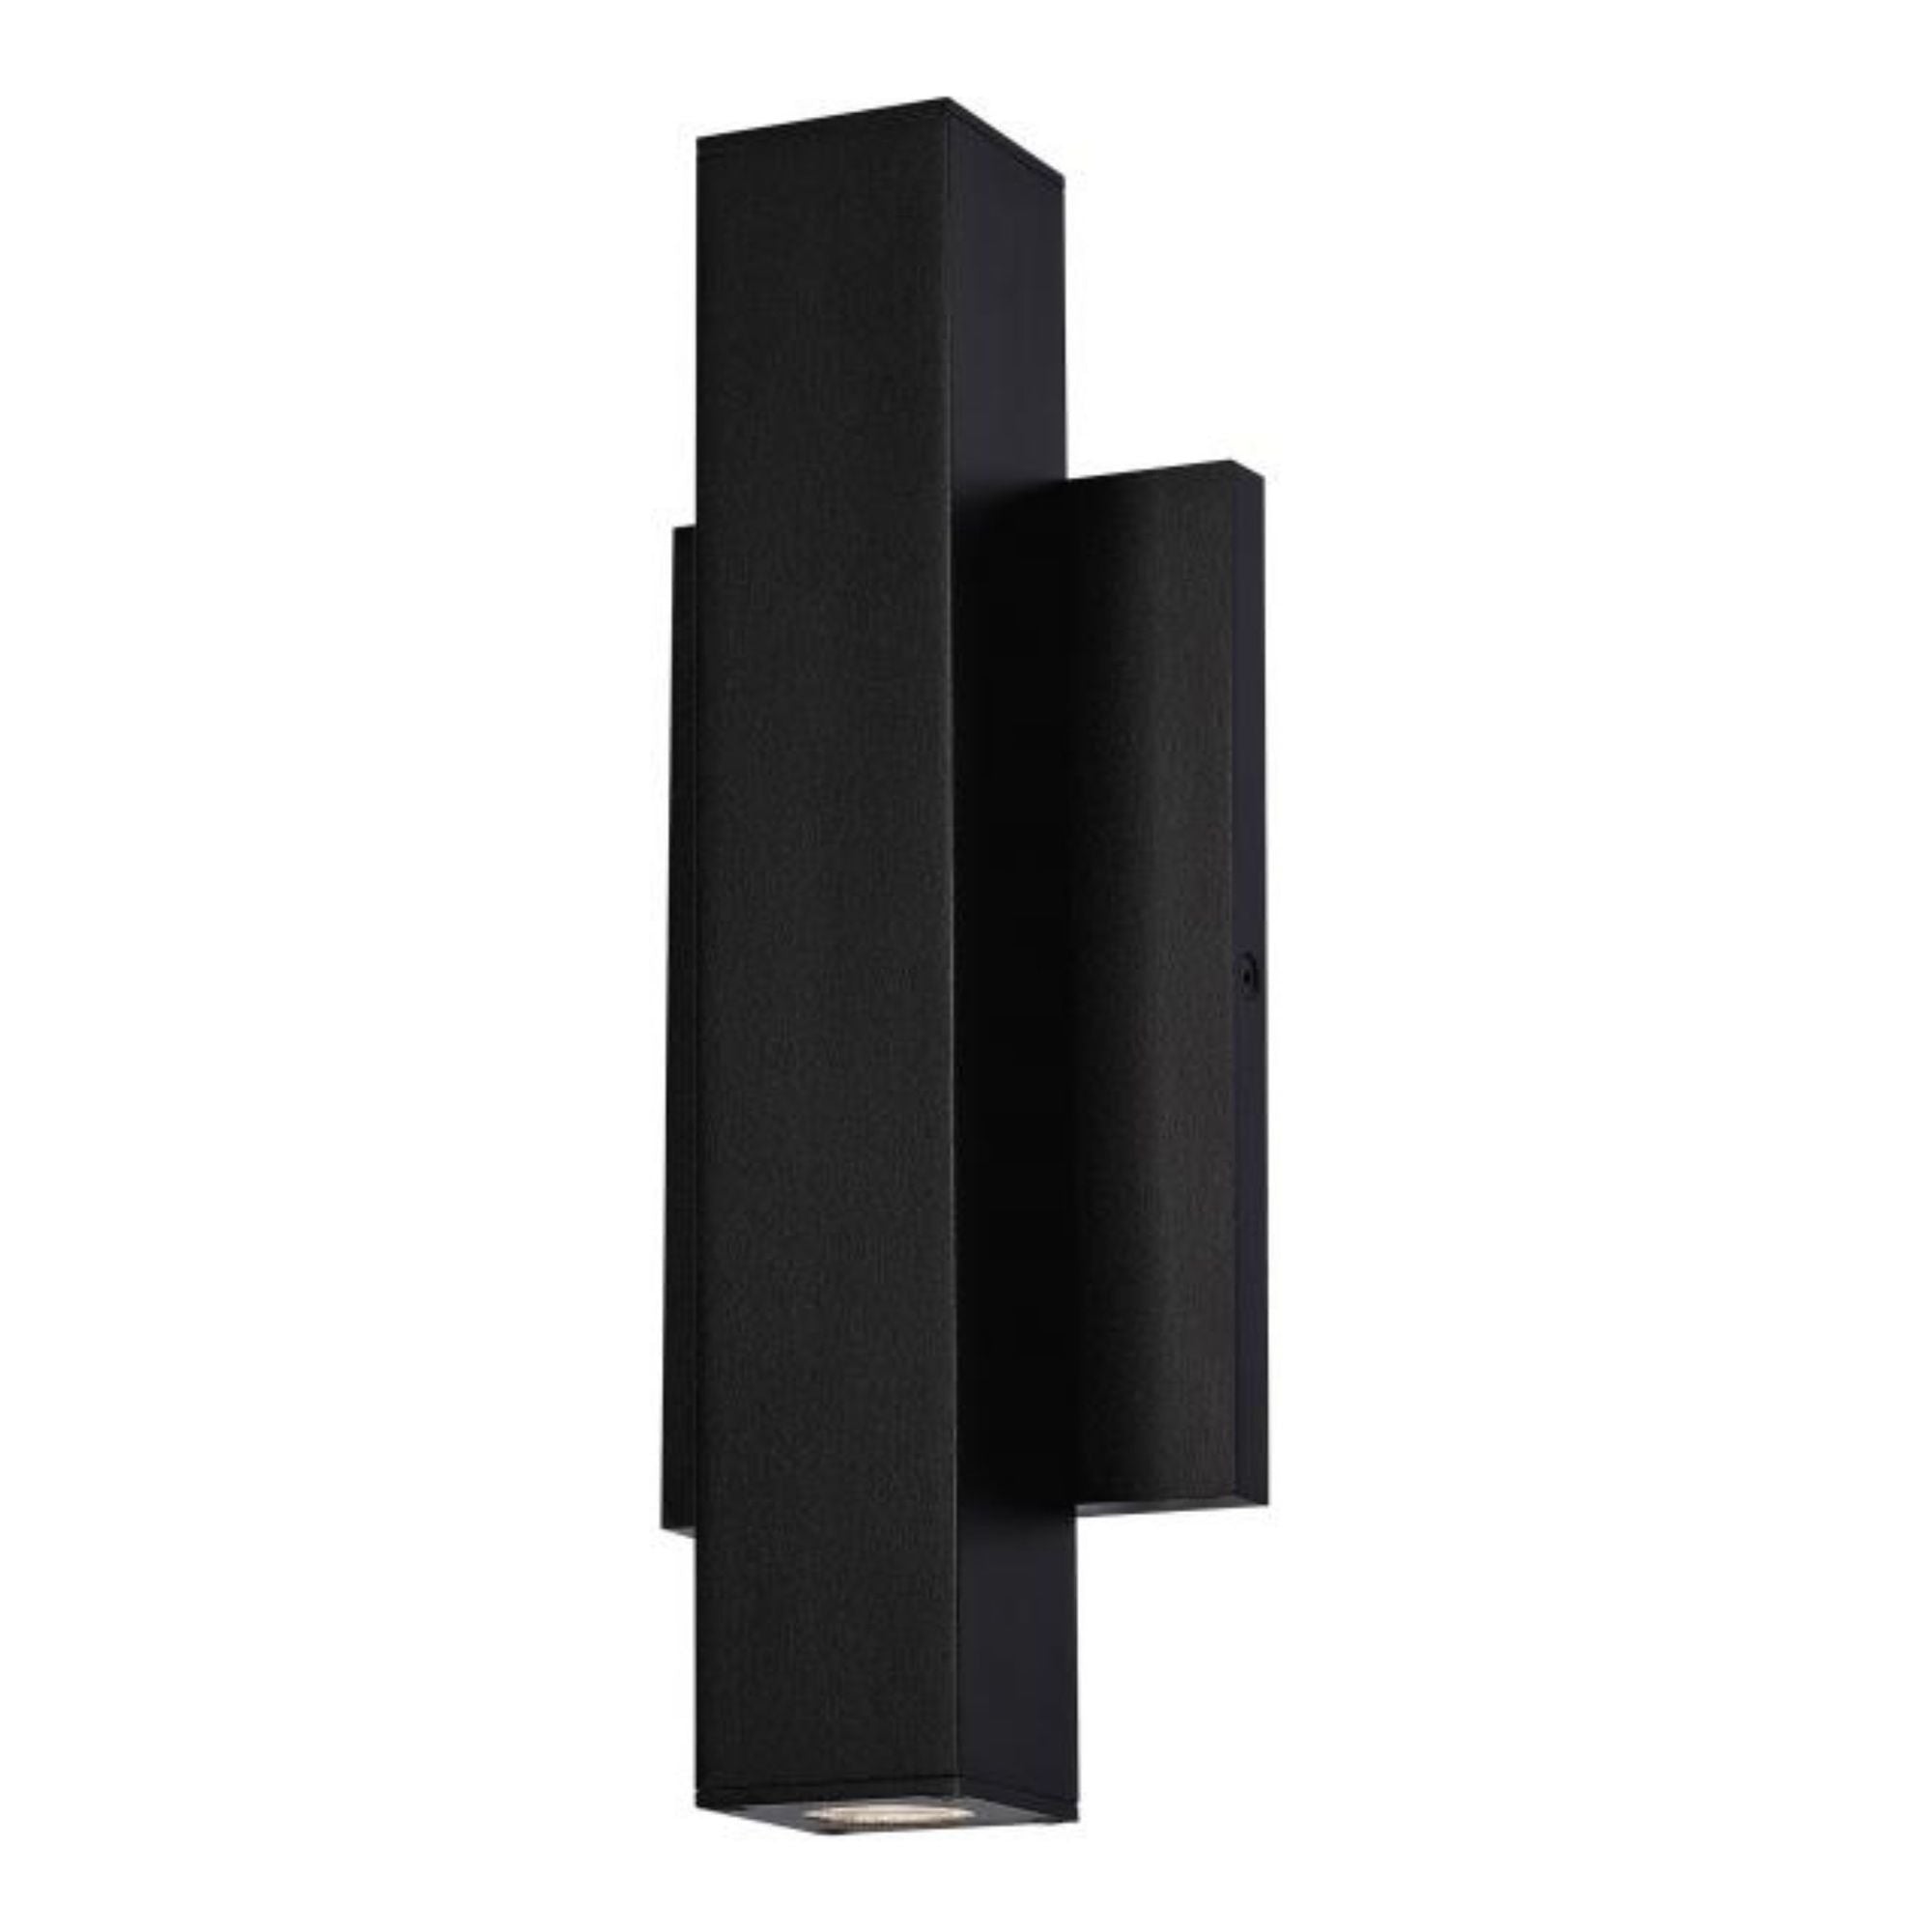 Chara Square 12 Outdoor Wall Outdoor 1-Light LED 3000K Black by Sean Lavin